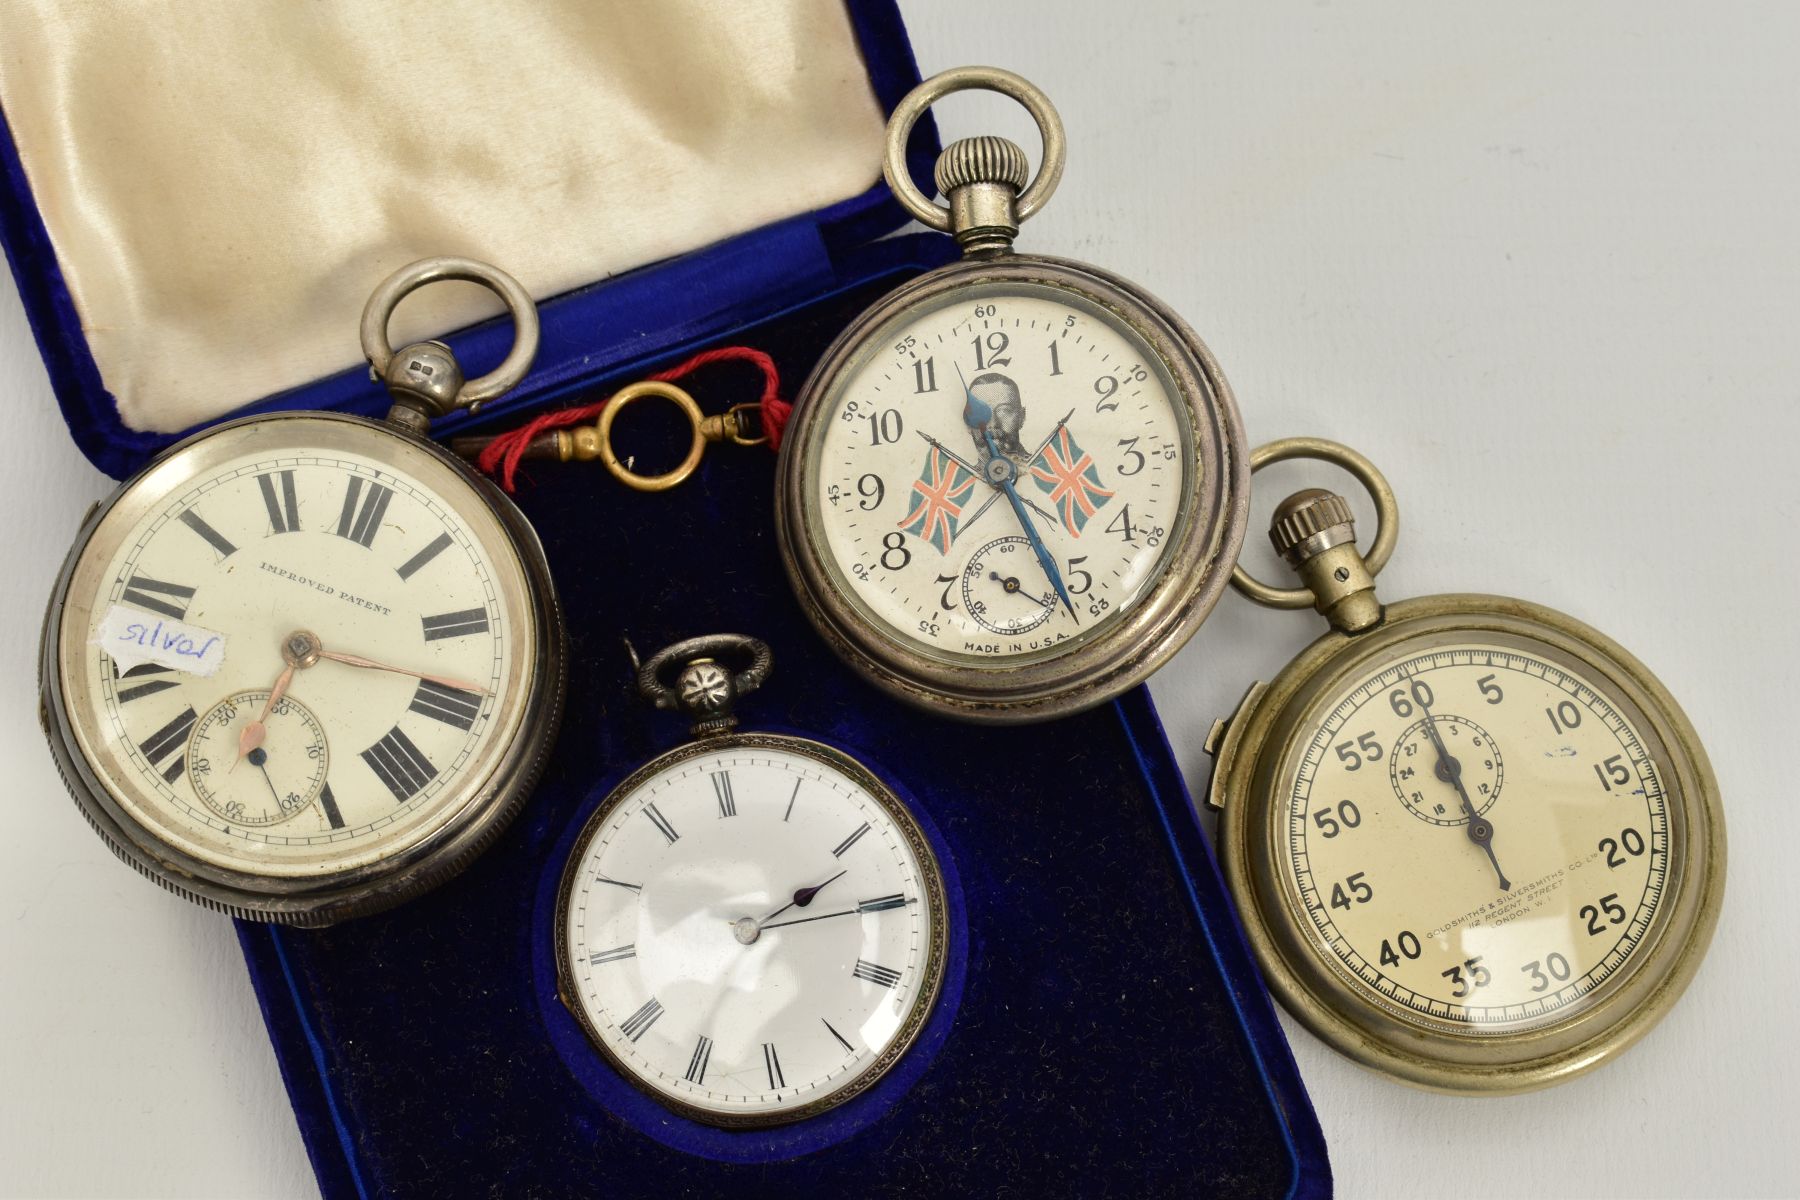 THREE POCKET WATCHES AND A STOP WATCH, to include a silver open faced watch, white dial, Roman